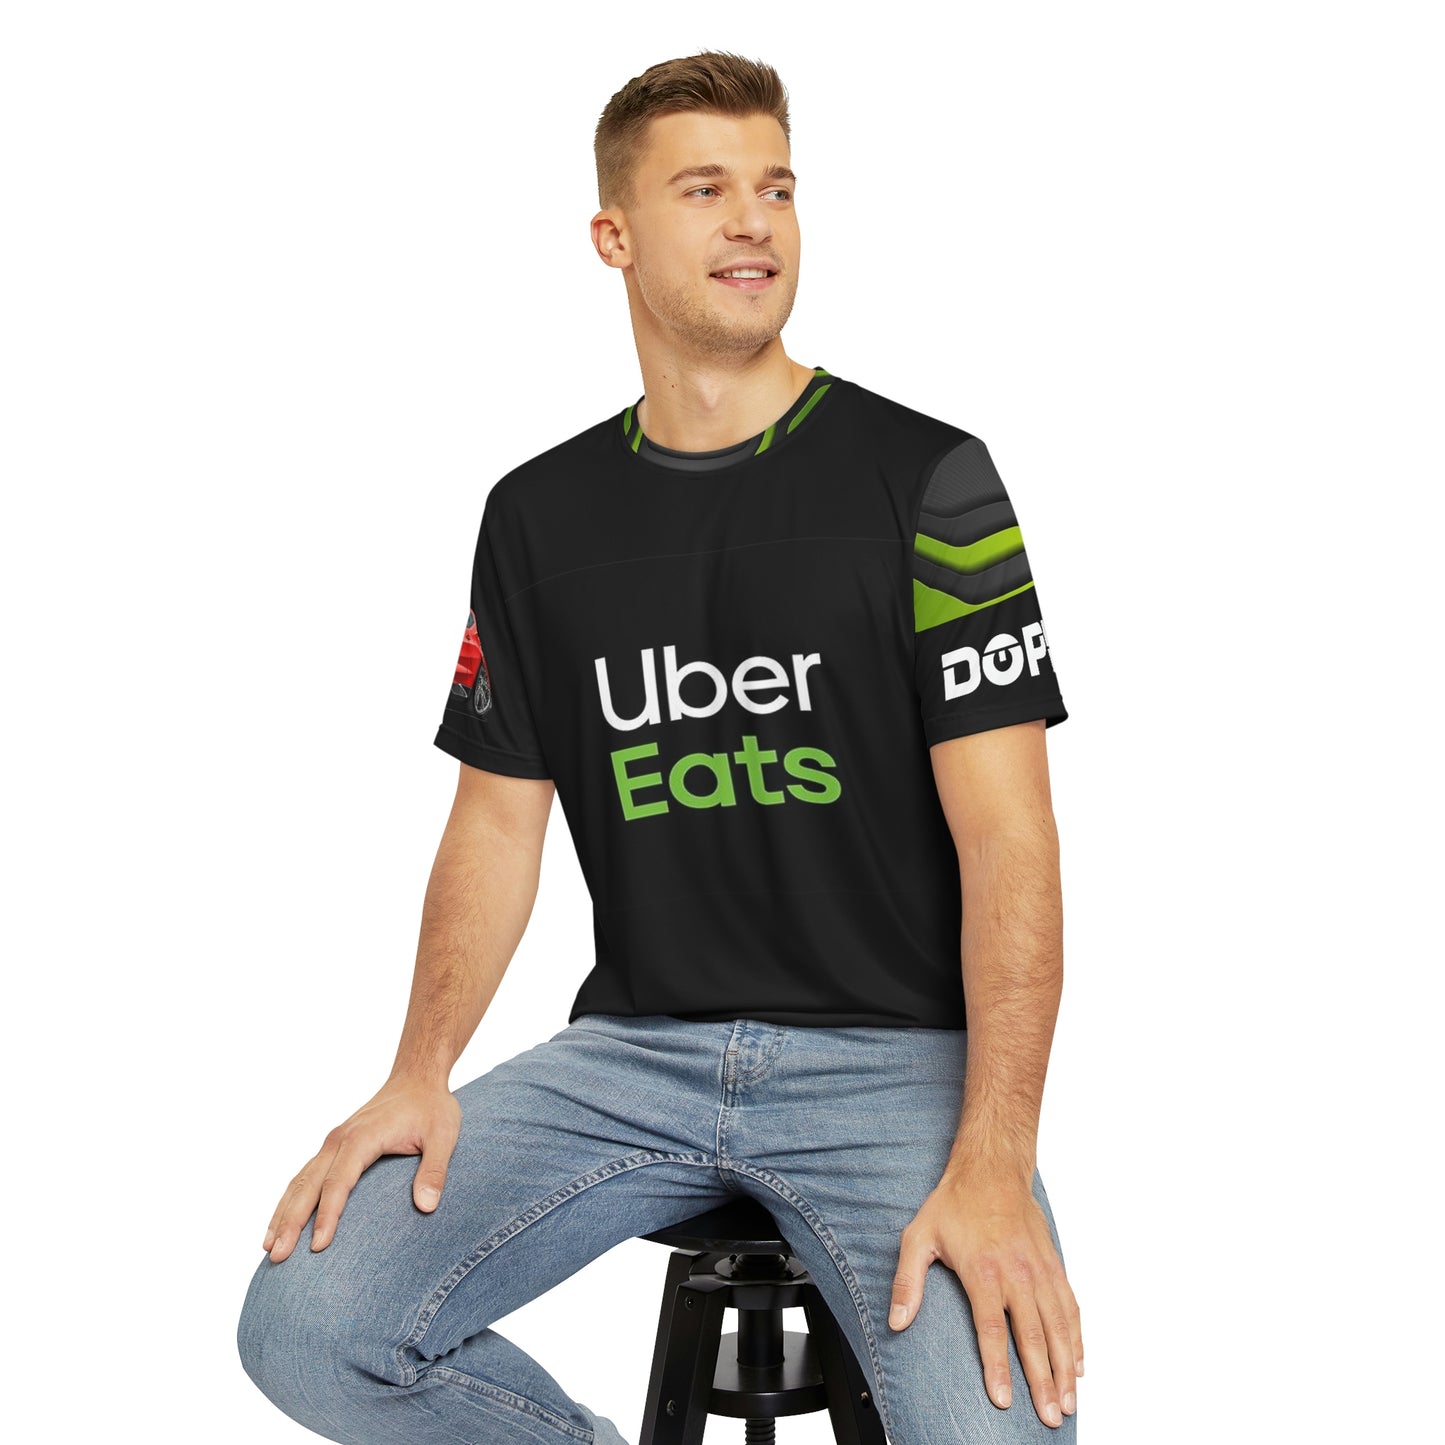 Uber Eats Cool delivery wear DOPiFiED Edition